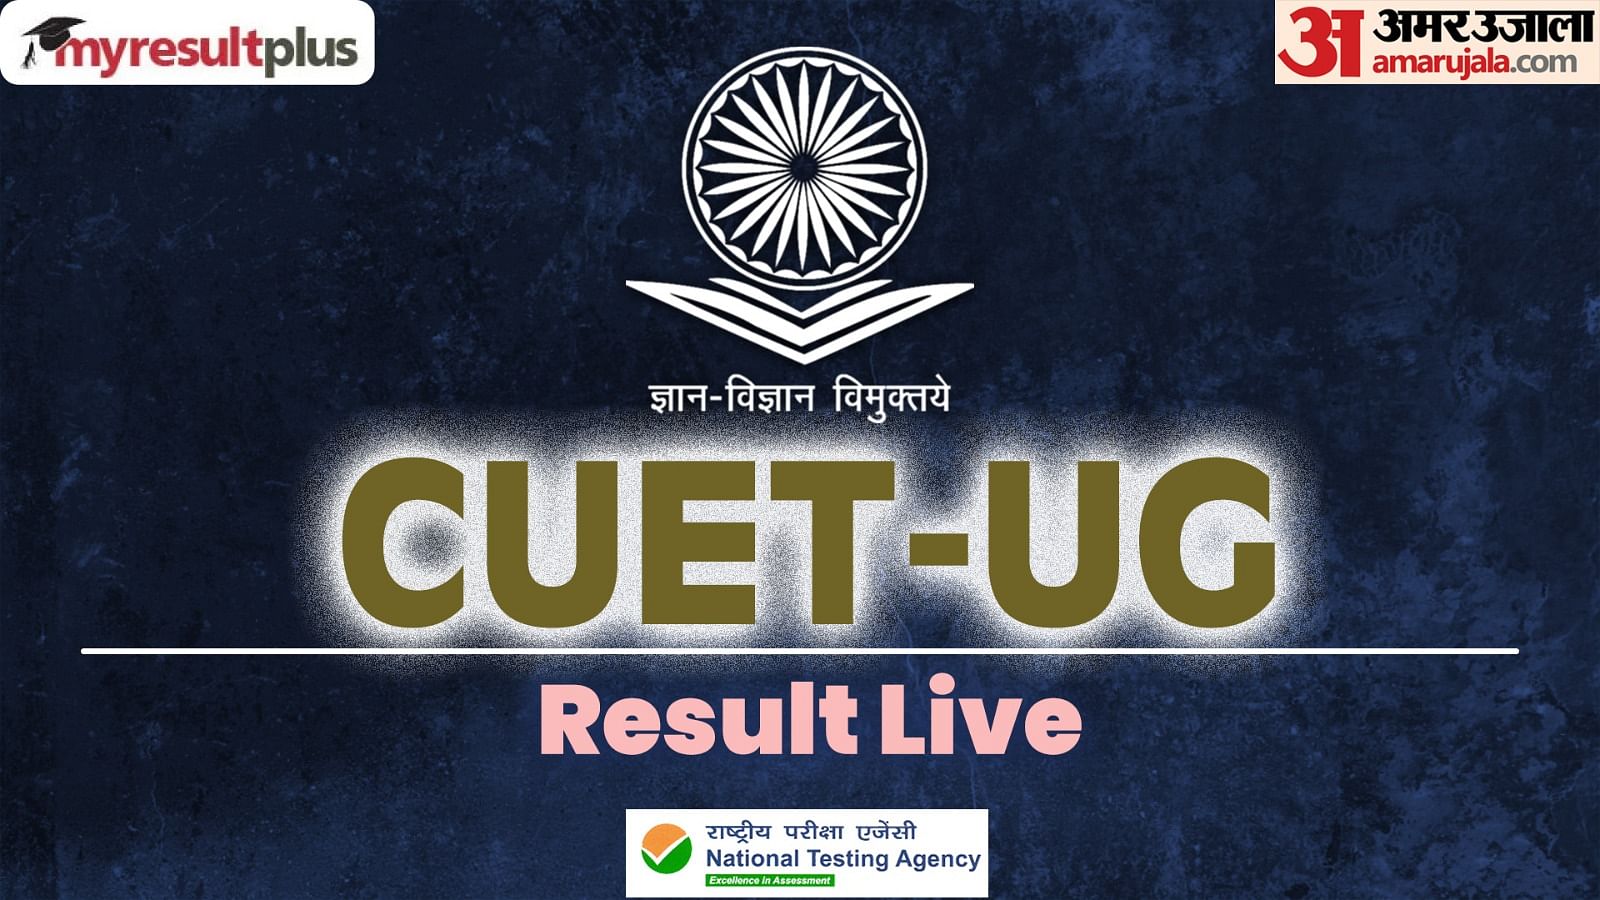 CUET UG Result 2023 Out Live: NTA CUET UG 2023 Result Declared, Check Latest Updates